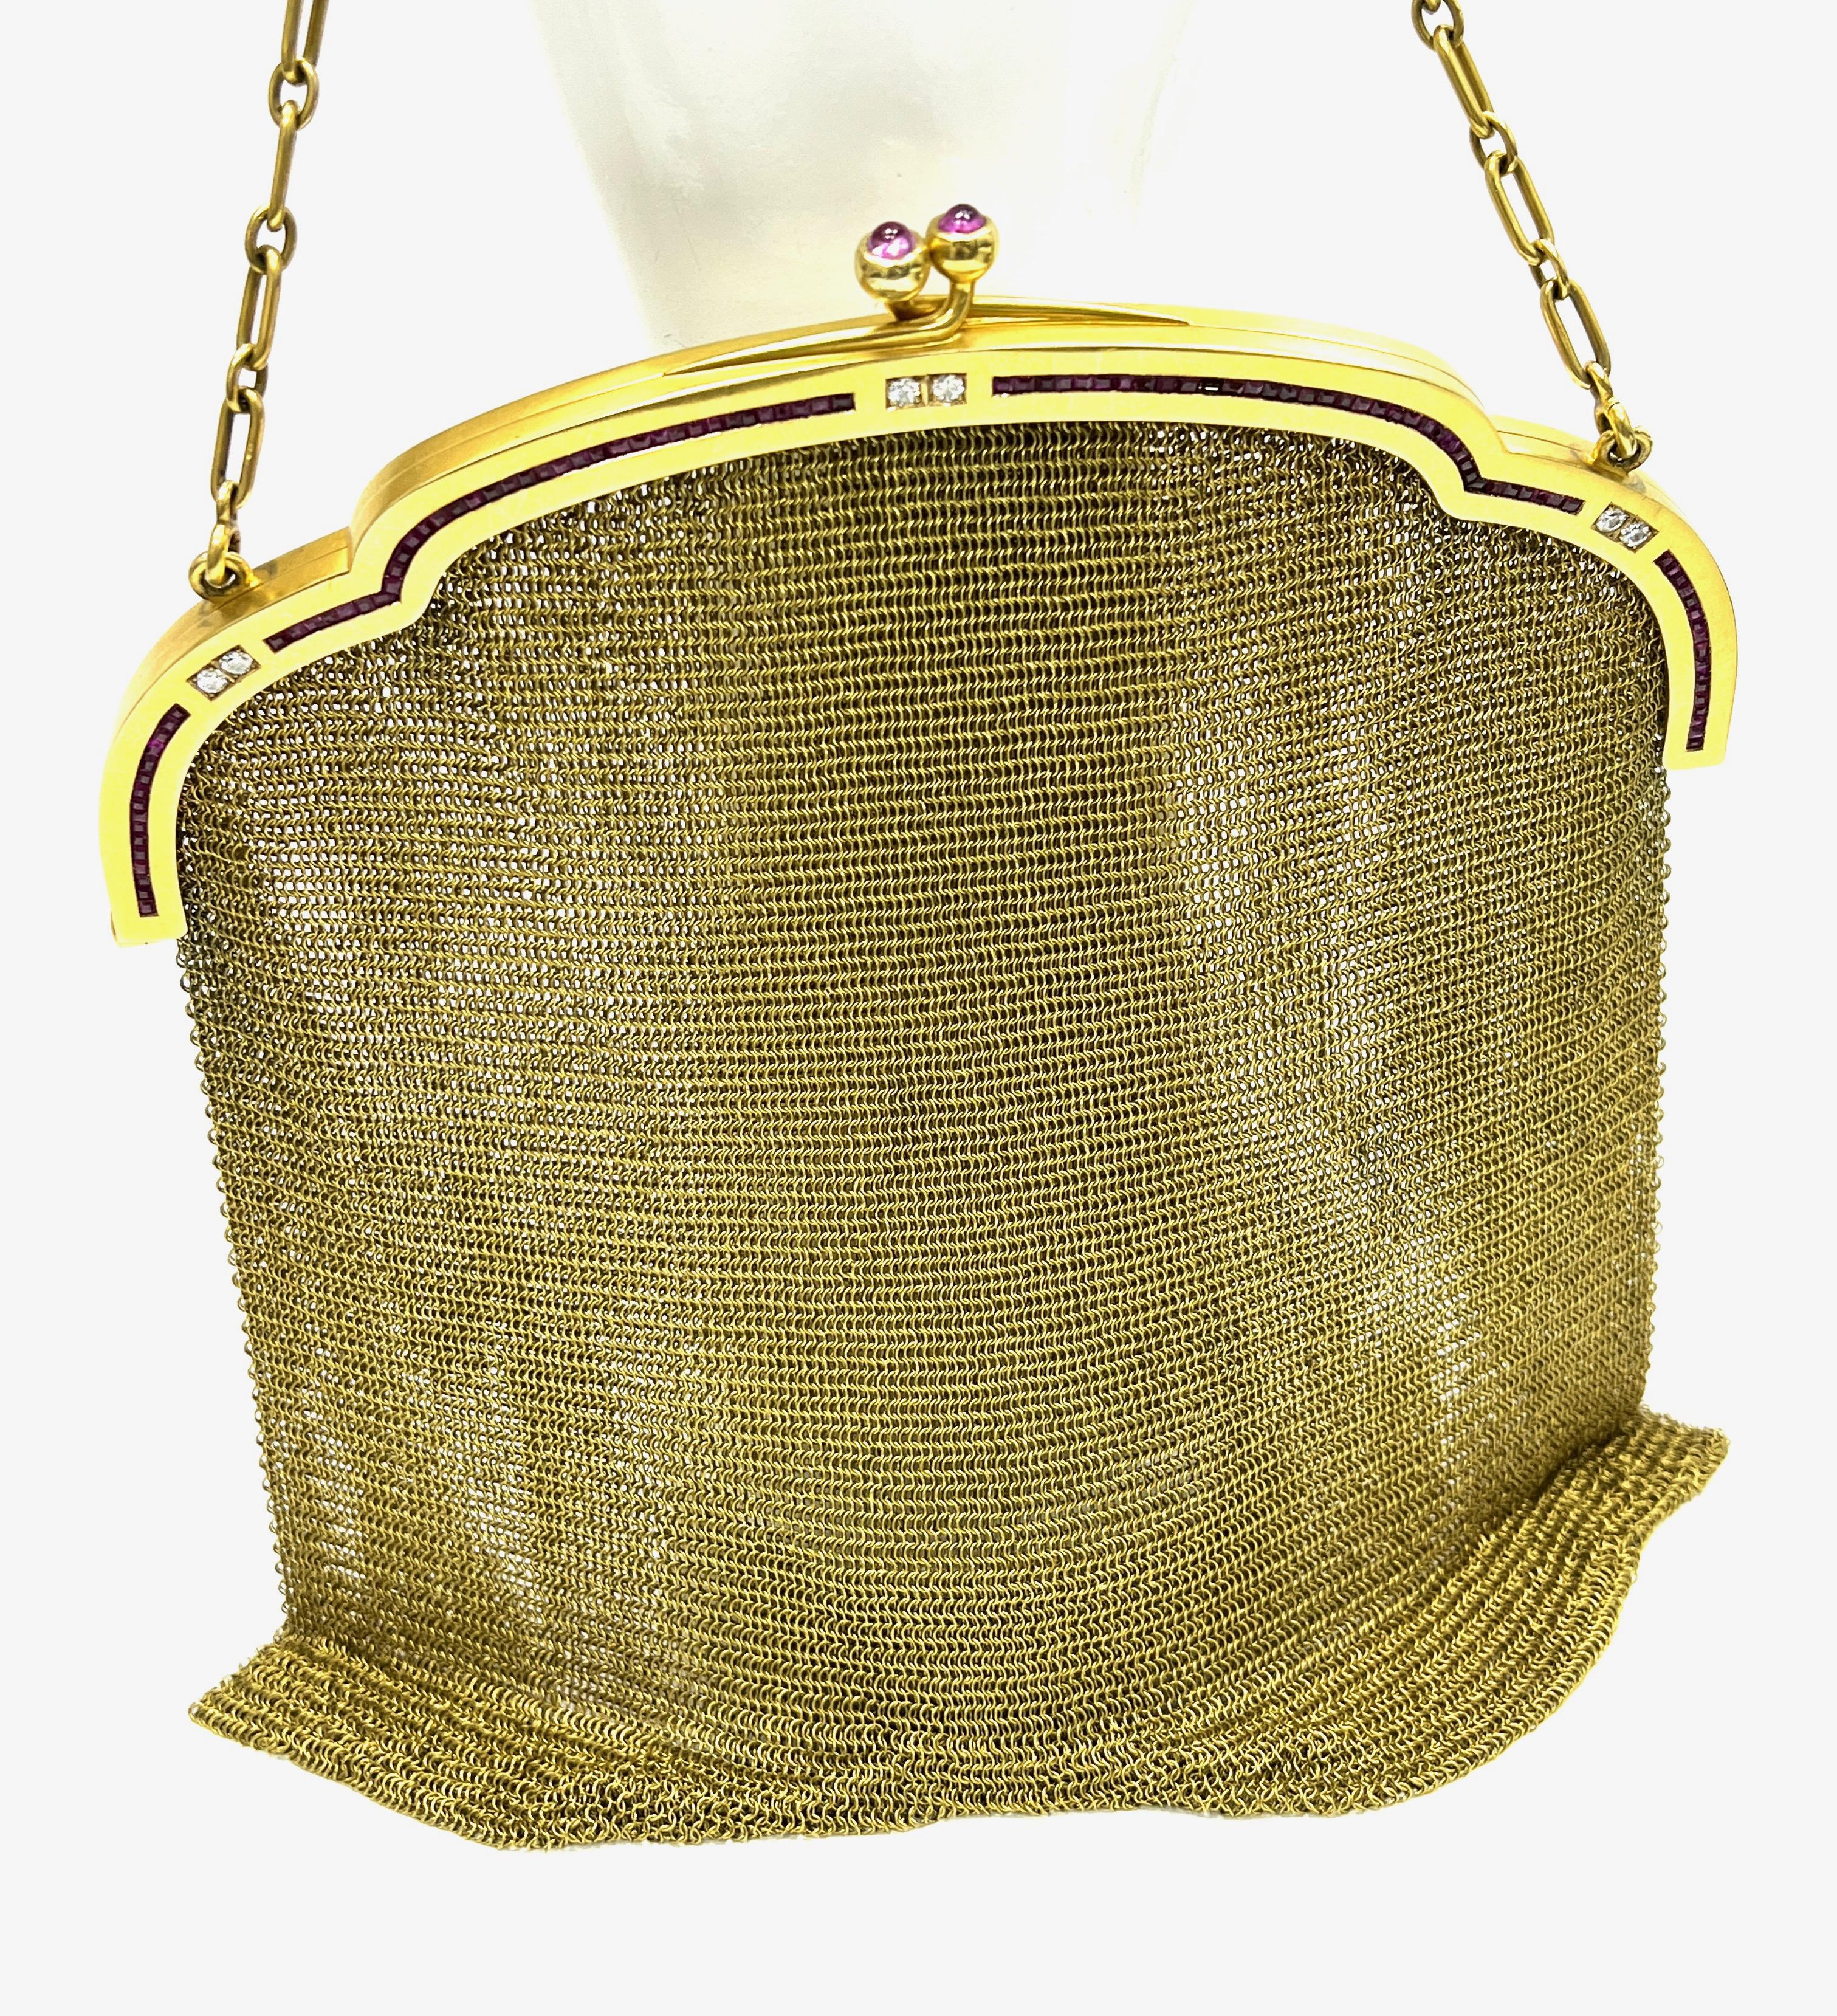 Mixed Cut Ruby Diamond Mesh Gold Purse For Sale